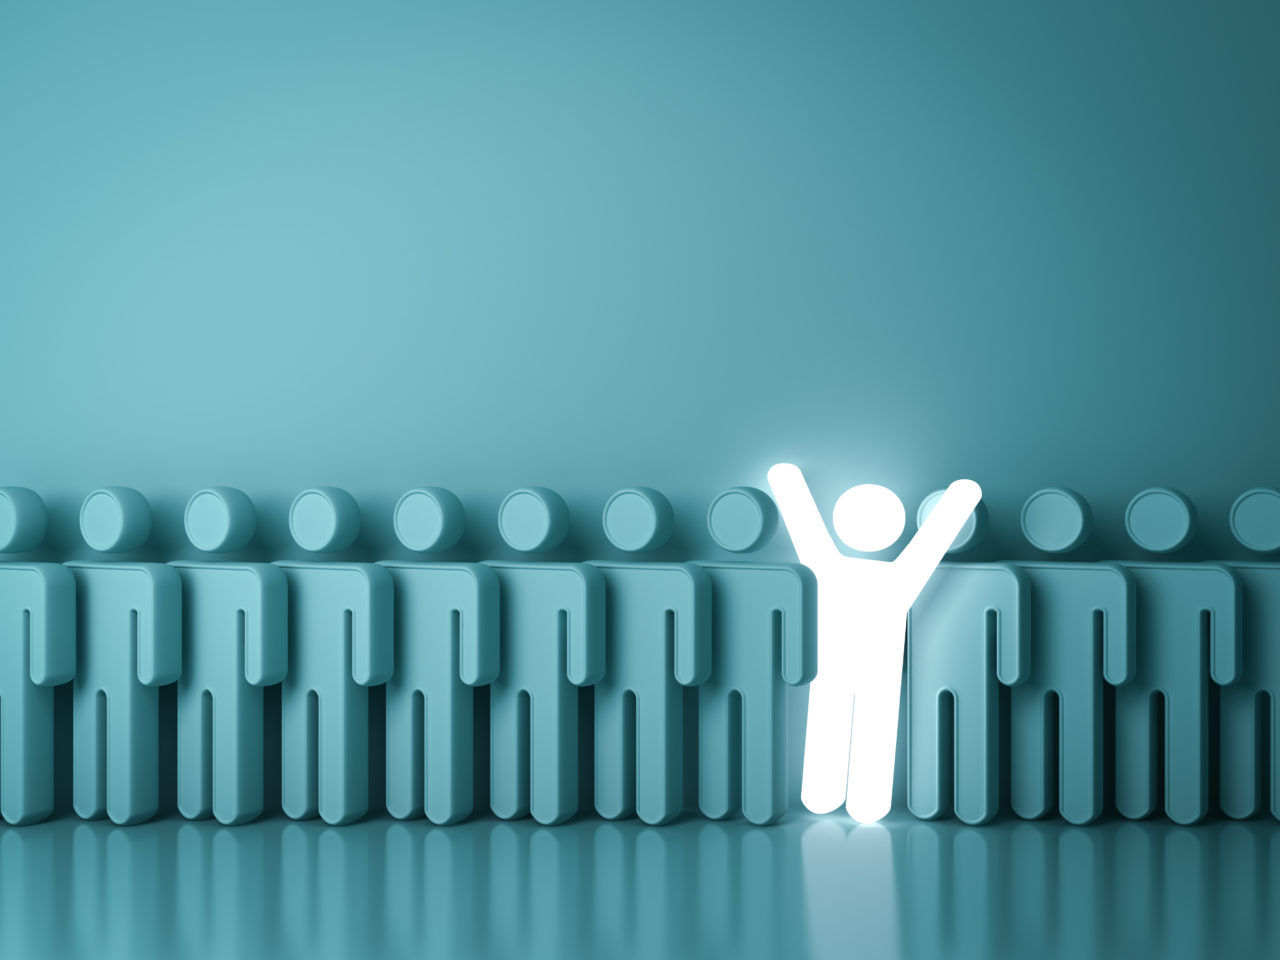 Stand out from the crowd digital marketing